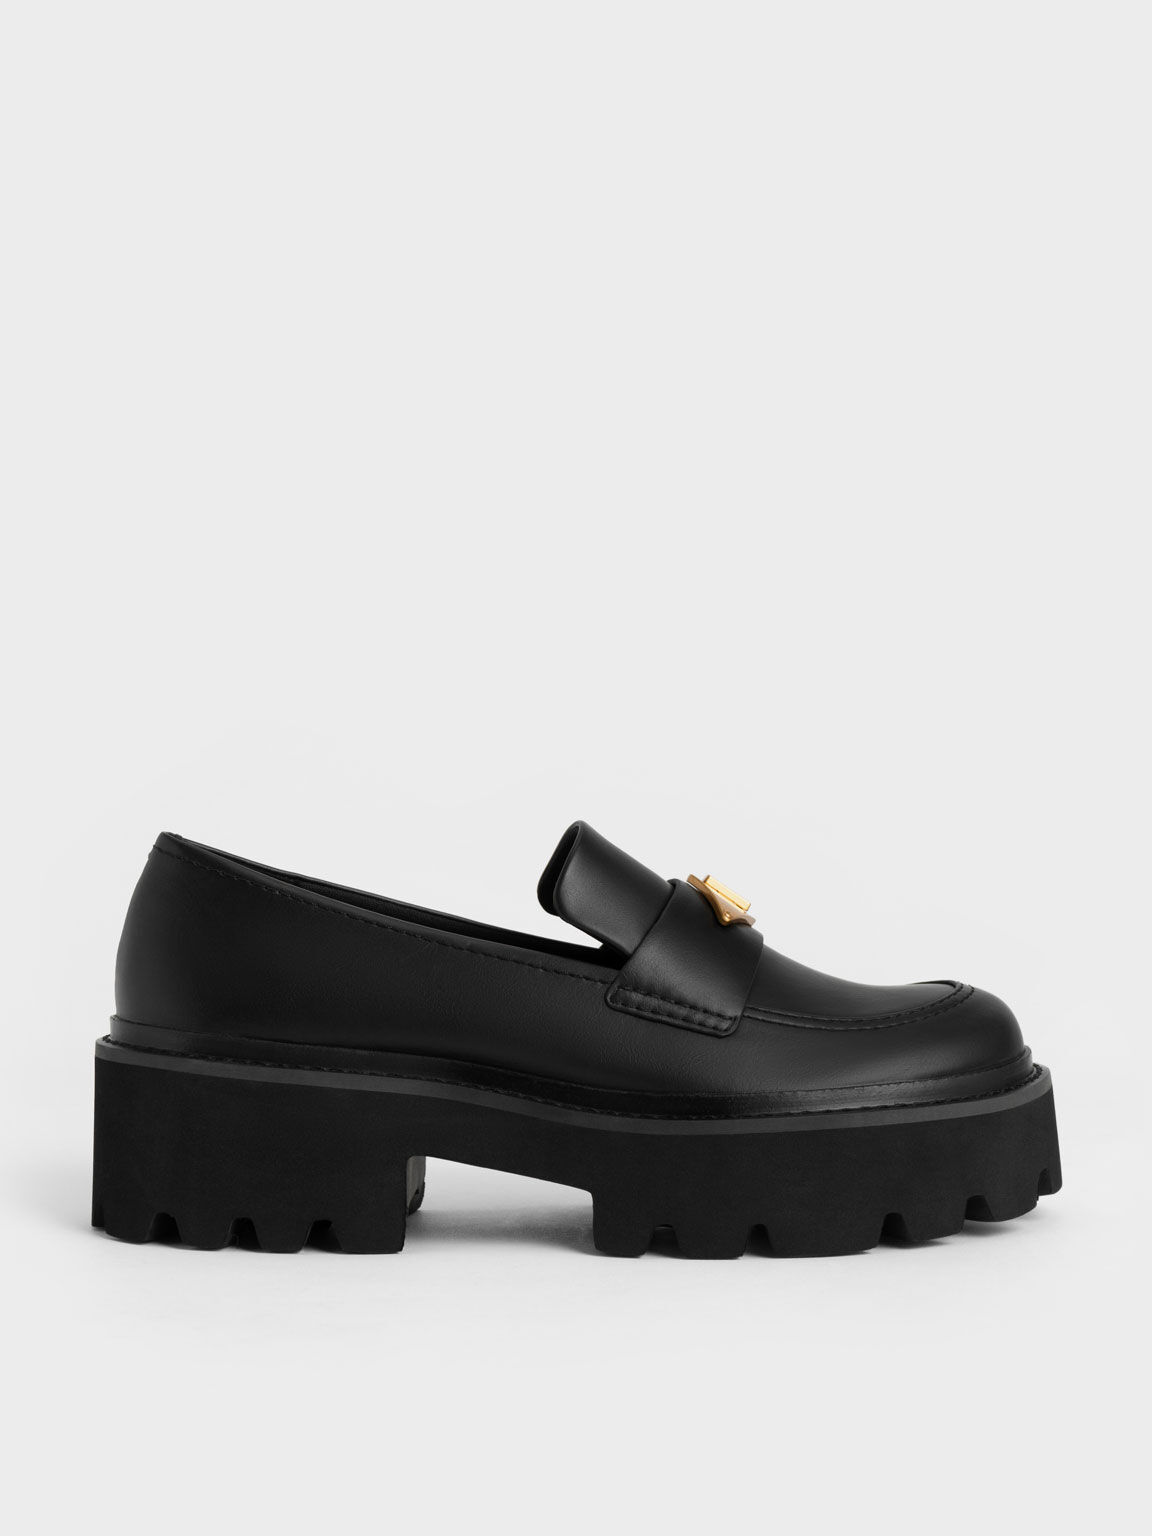 Metallic Accent Chunky Platform Penny Loafers, Black, hi-res